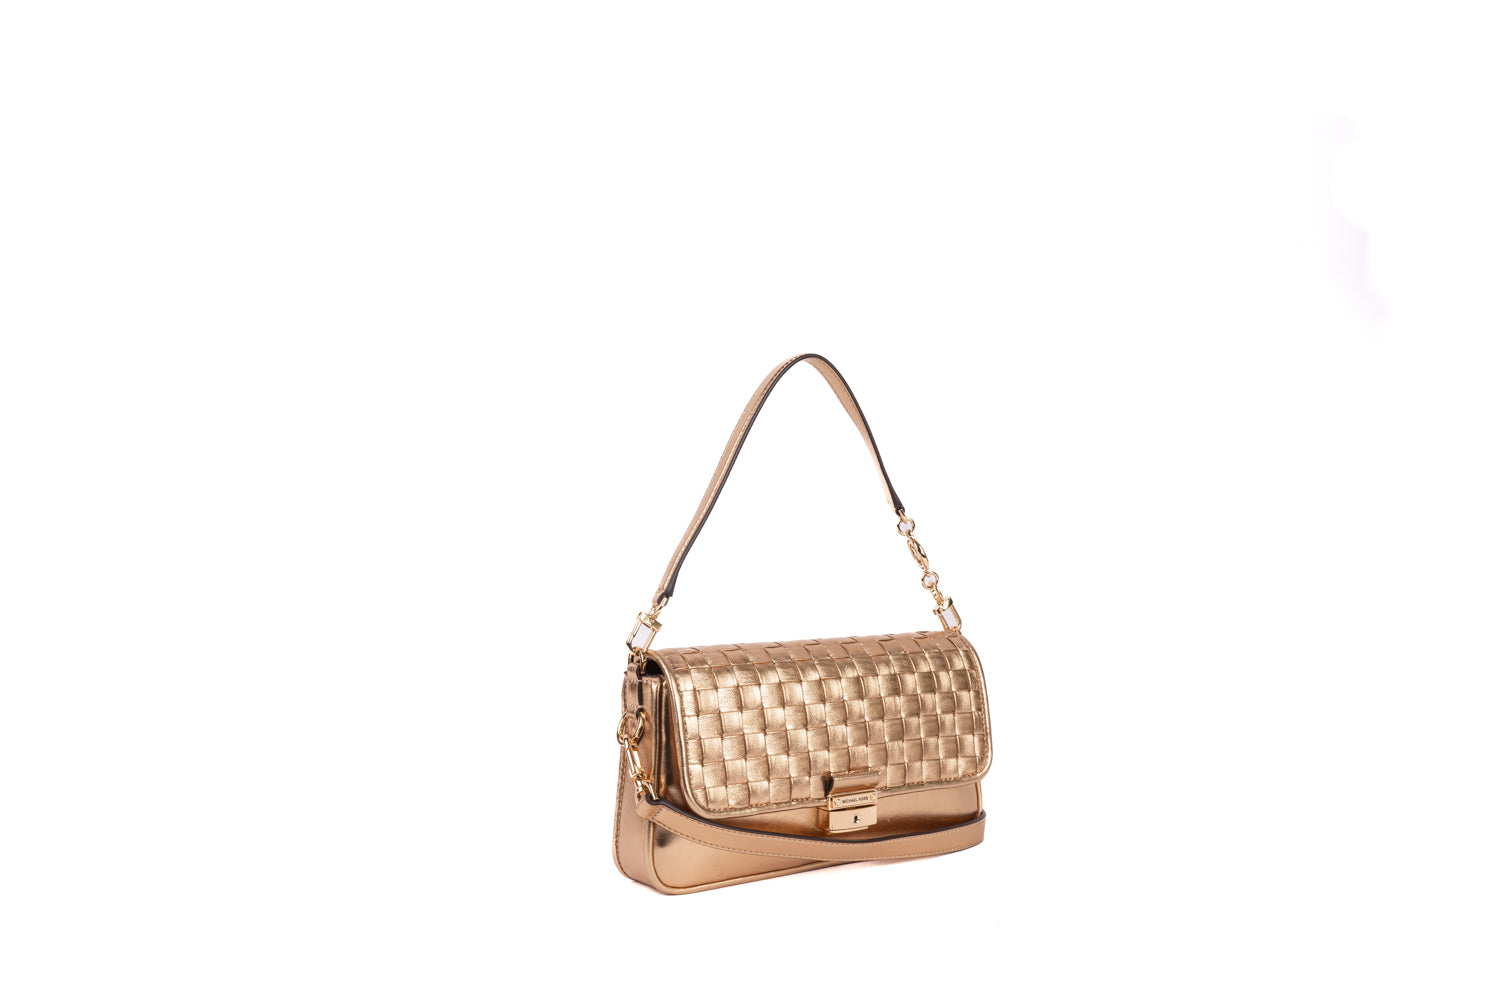 Small Brad- Show Woven Gold Leather Shoulder Bag